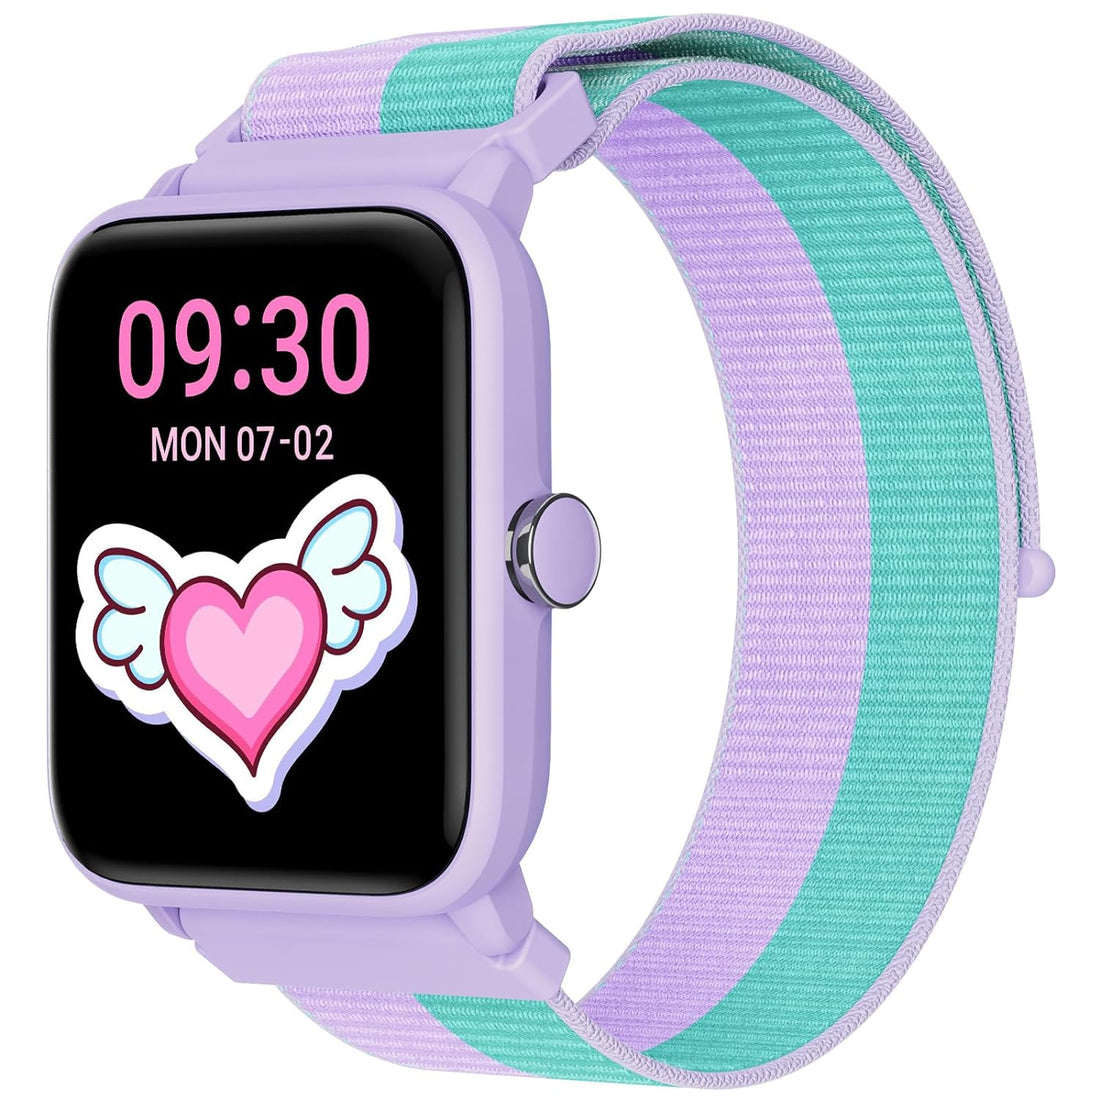 BIGGERFIVE Kids Fitness Tracker Watch, Pedometer, Heart Rate, 5ATM Waterproof, Sleep Monitor, Alarm Clock, Calorie Step Counter, 1.5" HD Touch Screen Kids Smart Watch for Girls Ages 3-14, Nylonlilac